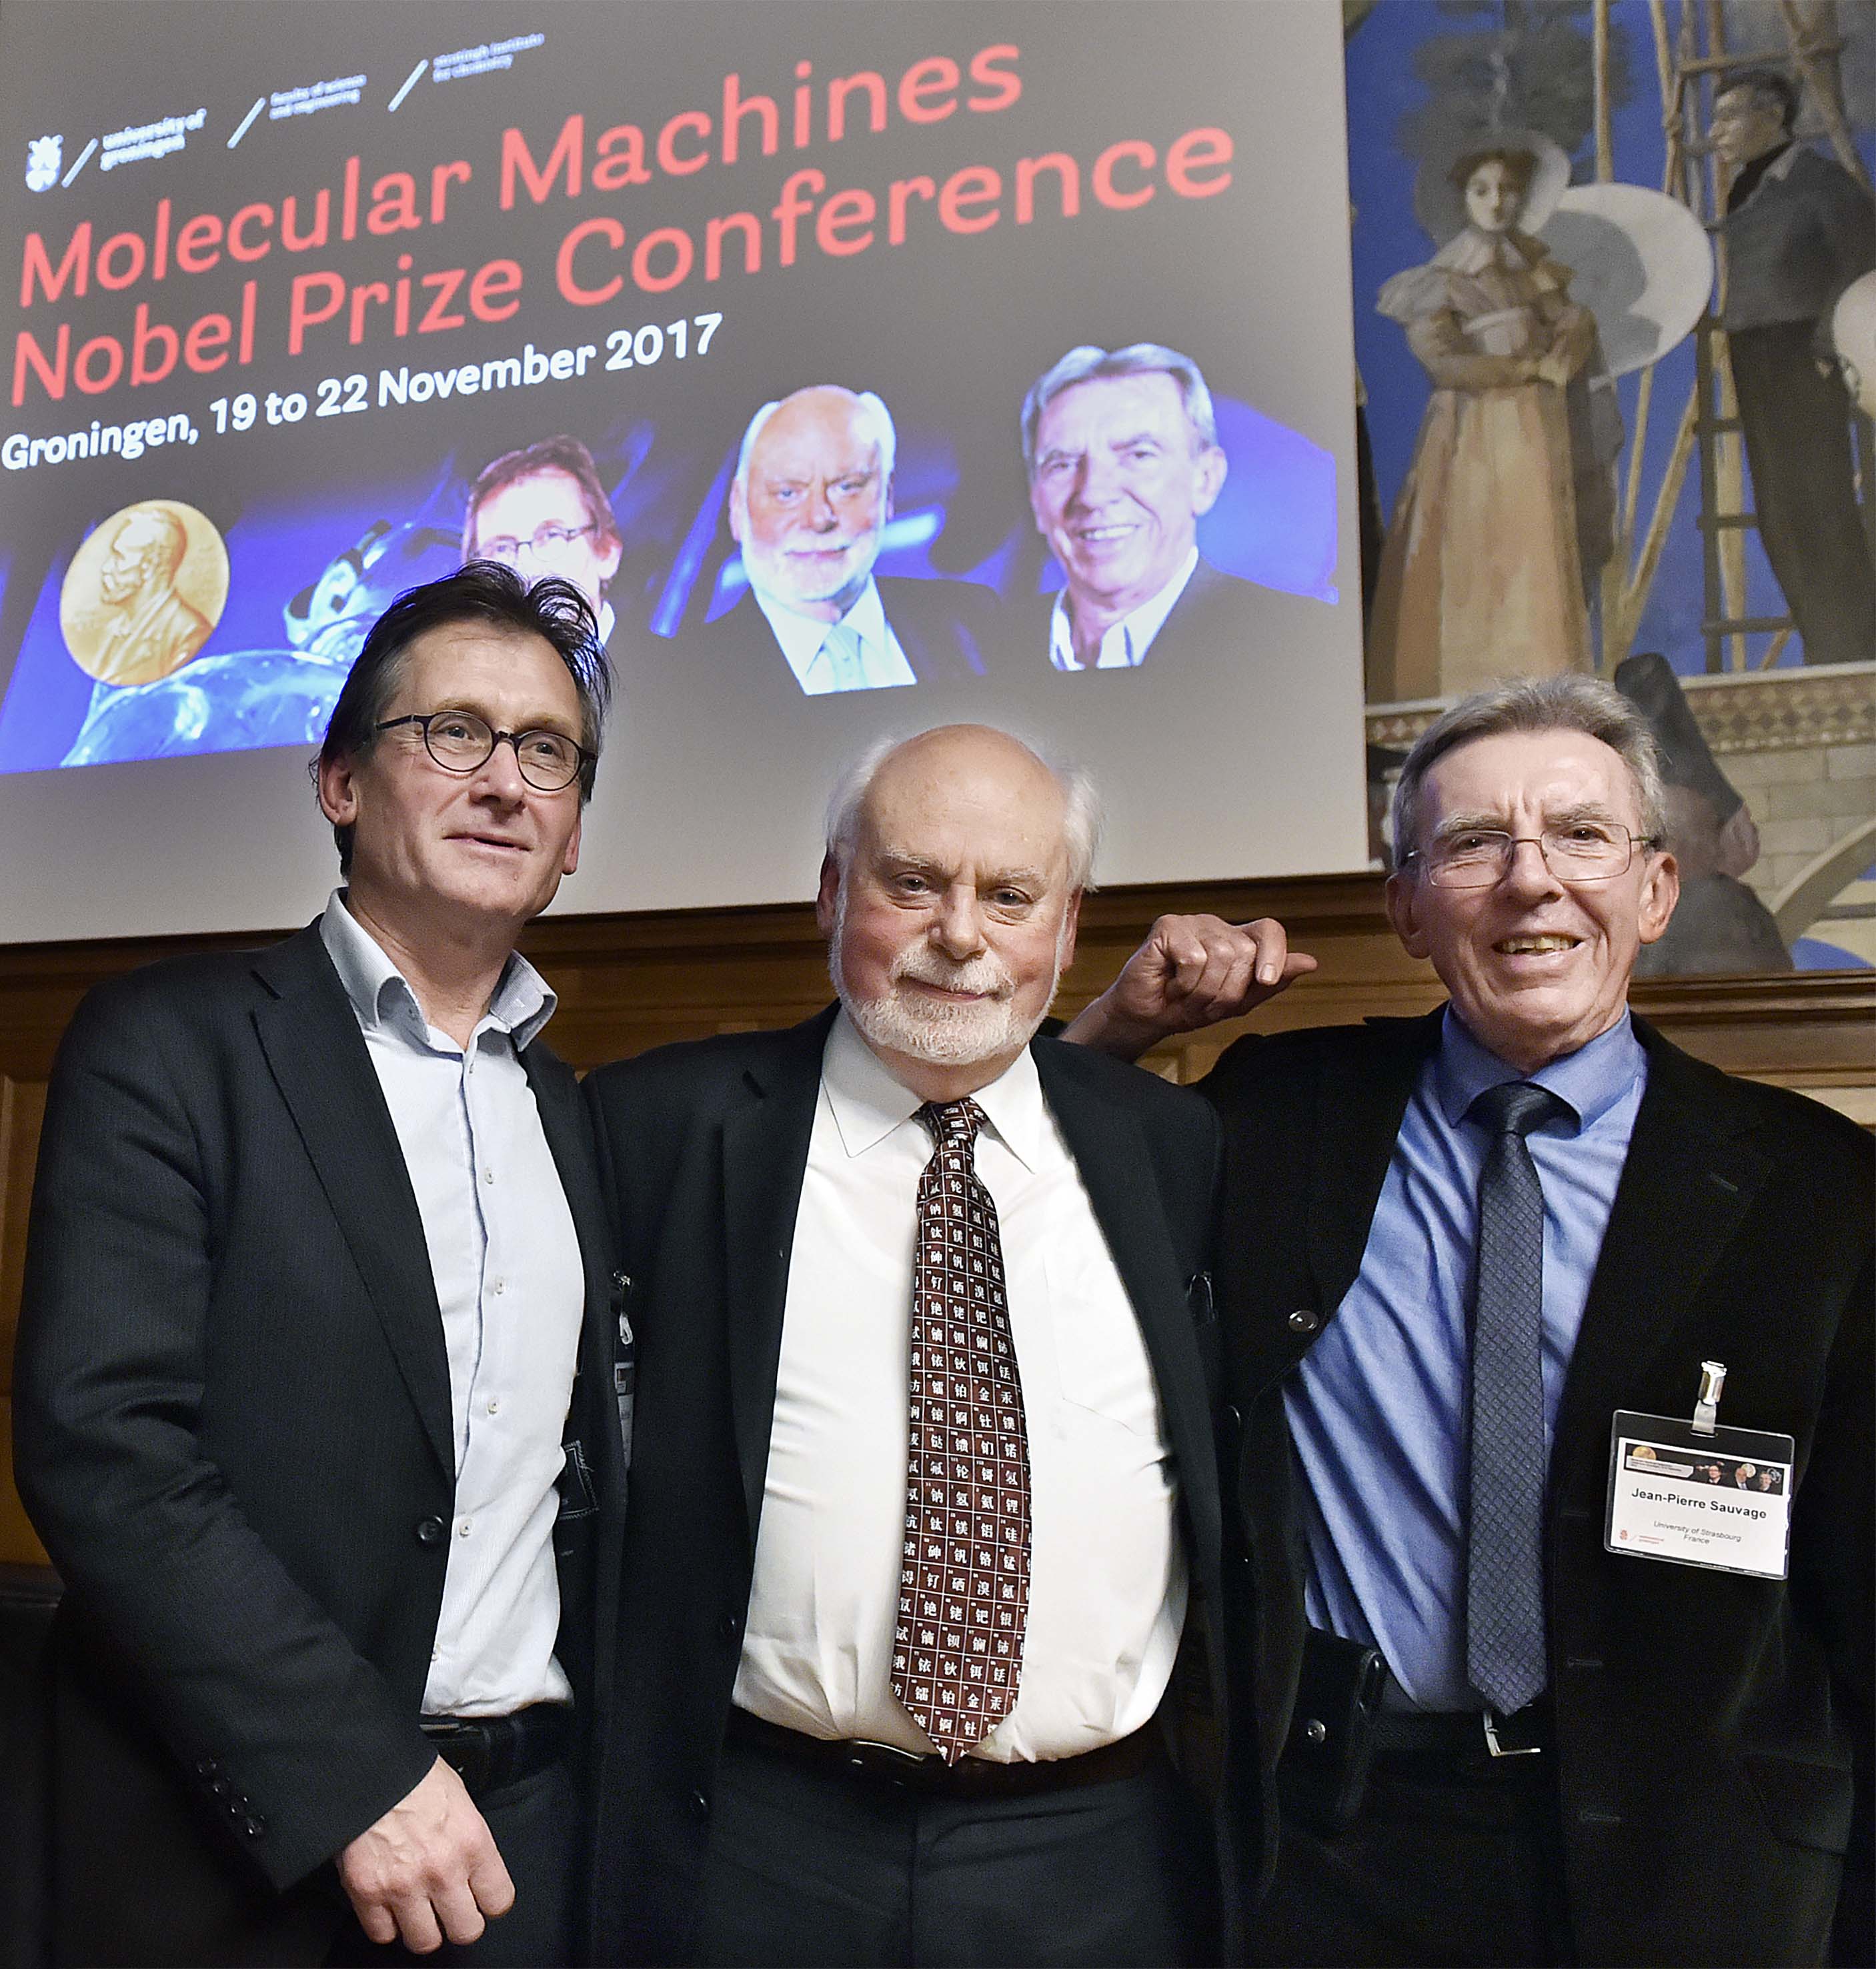 21 November 2017: Nobel Prize winners Ben Feringa, Fraser Stoddart, and Jean-Pierre Sauvage (Nobel Prize in Chemistry 2016) in the Aula of the Academy Building.